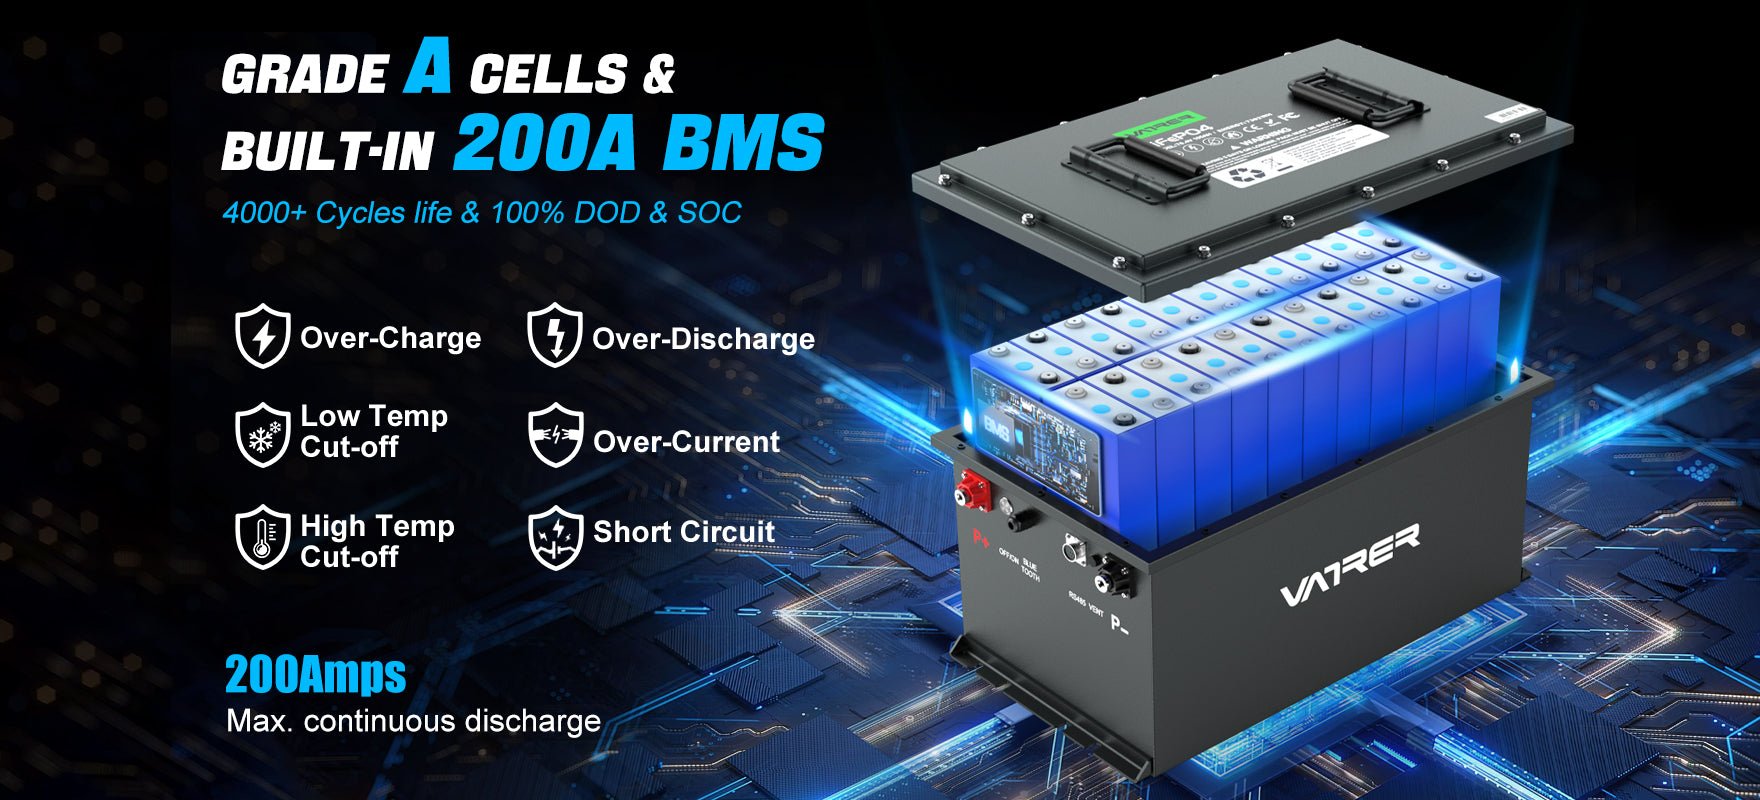 Grade A Cells and Built-in 200A BMS